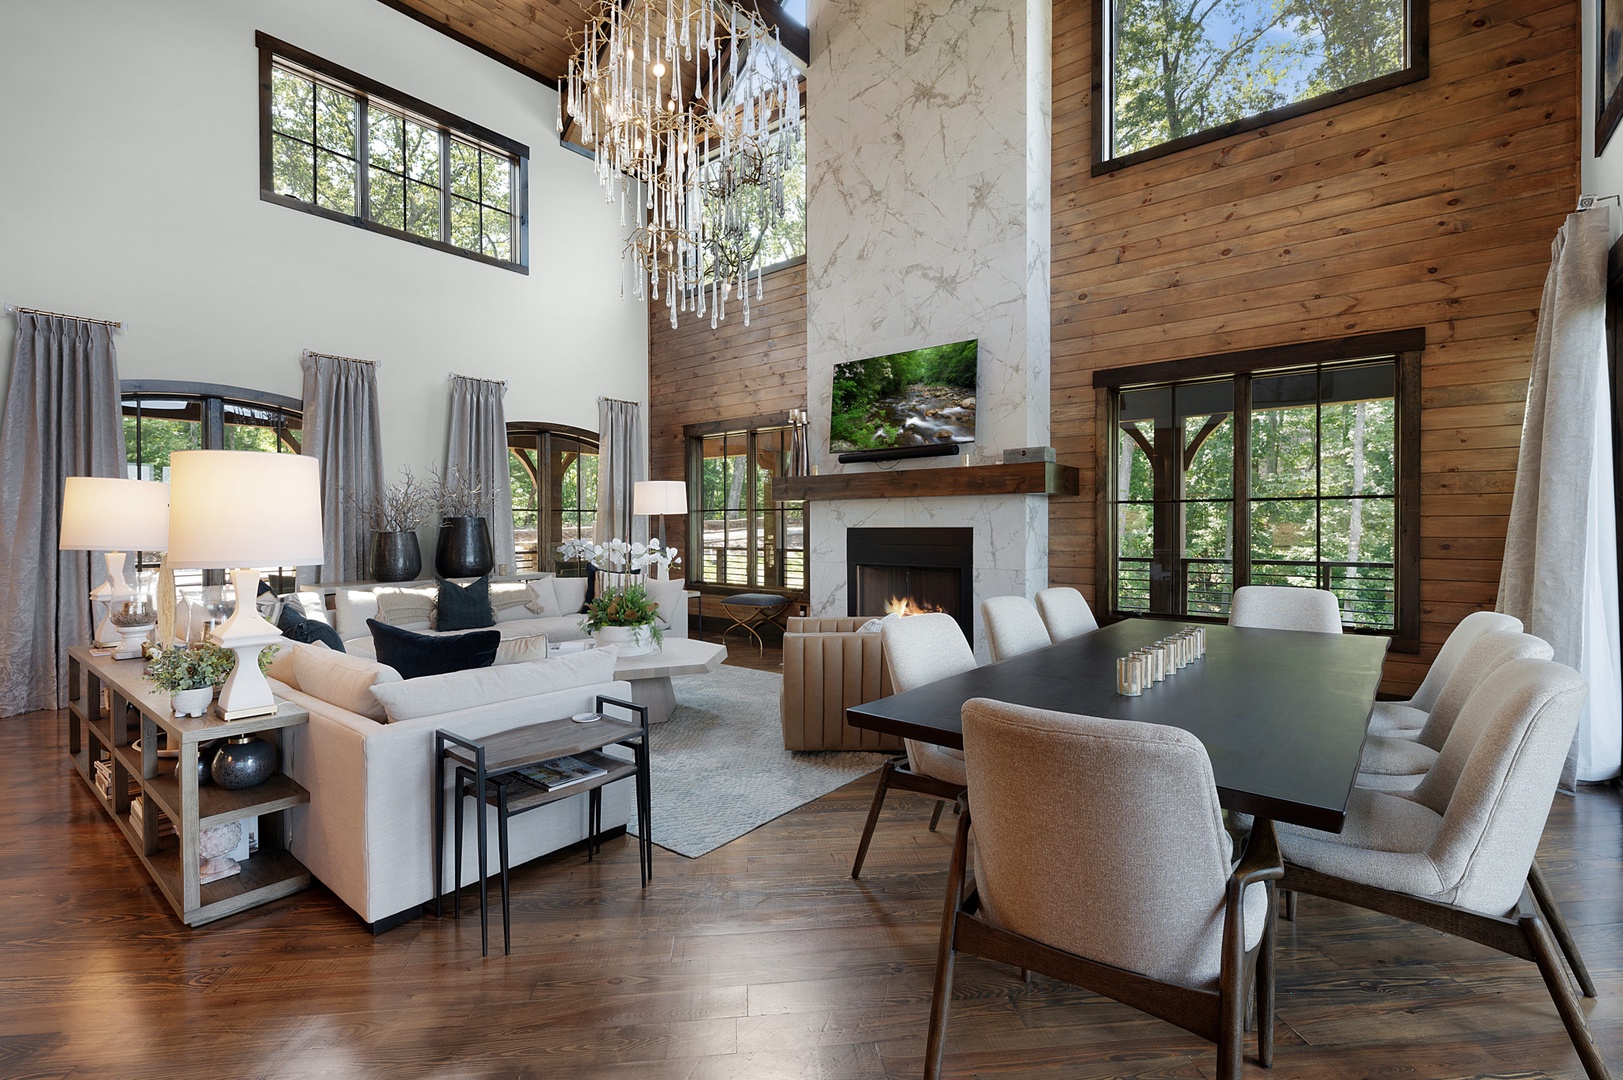 The Sanctuary: Entry Level Living Room's Open Concept